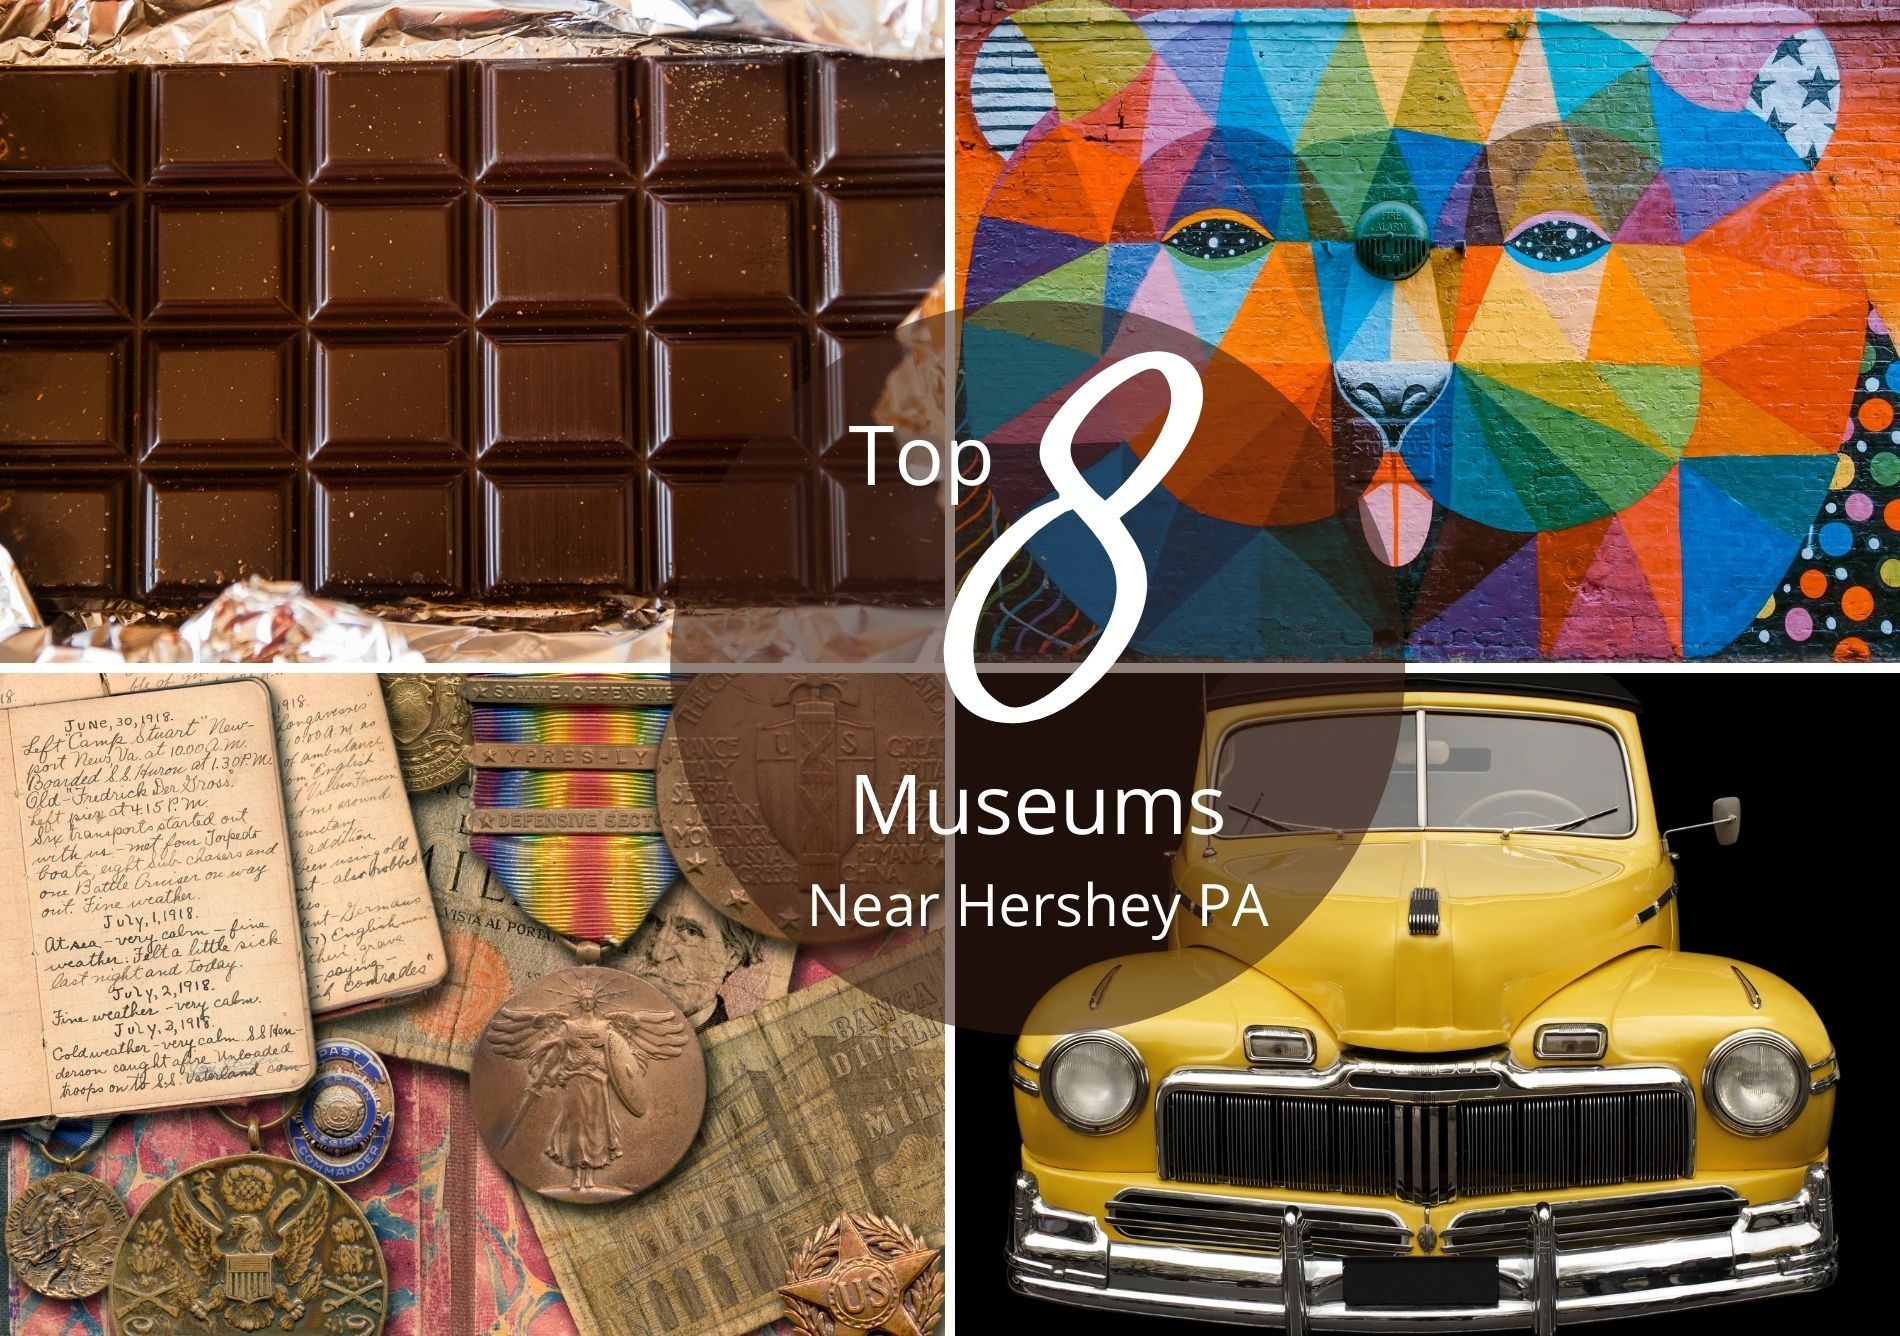 Quadrant of images of chocolate, art, an antique car, and Civil War memorabilia with text “Top 8 Museums Near Hershey PA”